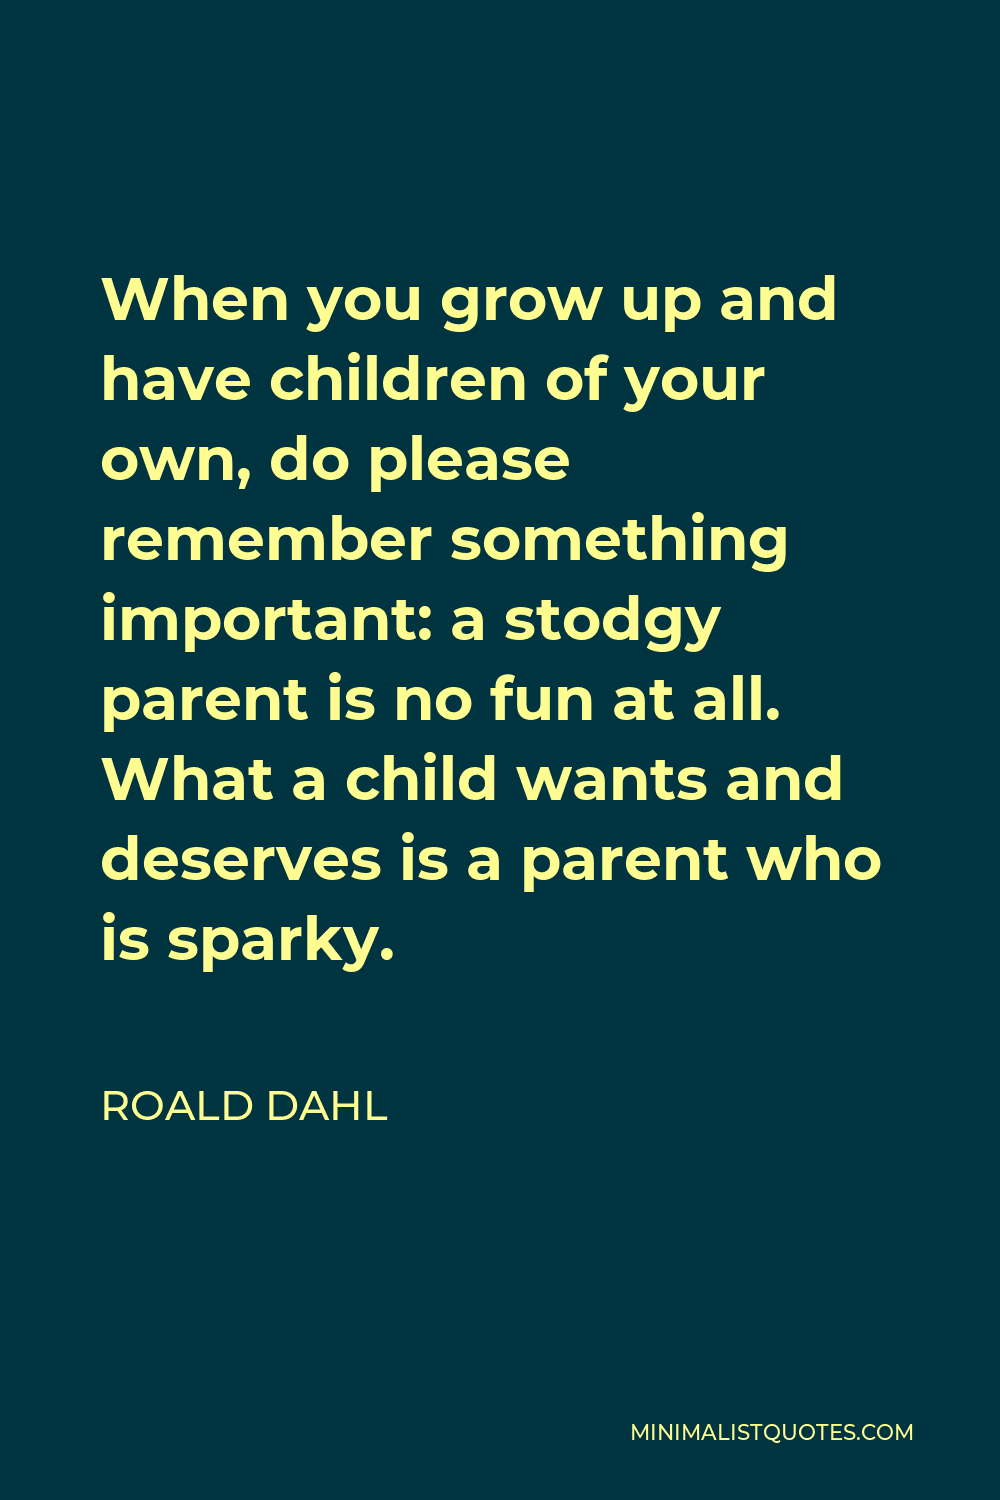 Roald Dahl Quote: When you grow up and have children of your own, do ...